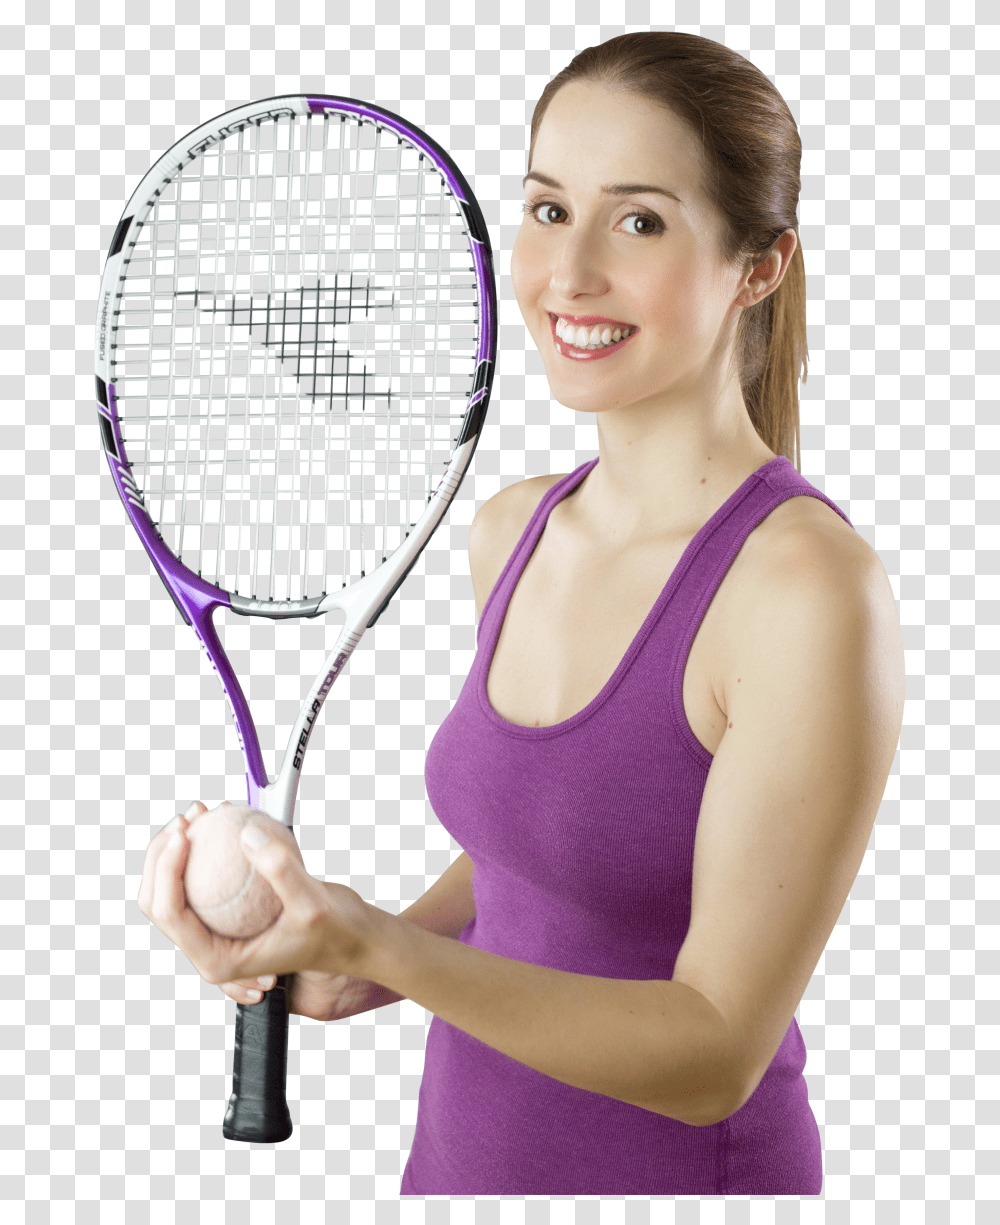 Female Tennis Player Image Female Tennis Player, Person, Human, Tennis Racket, Clothing Transparent Png